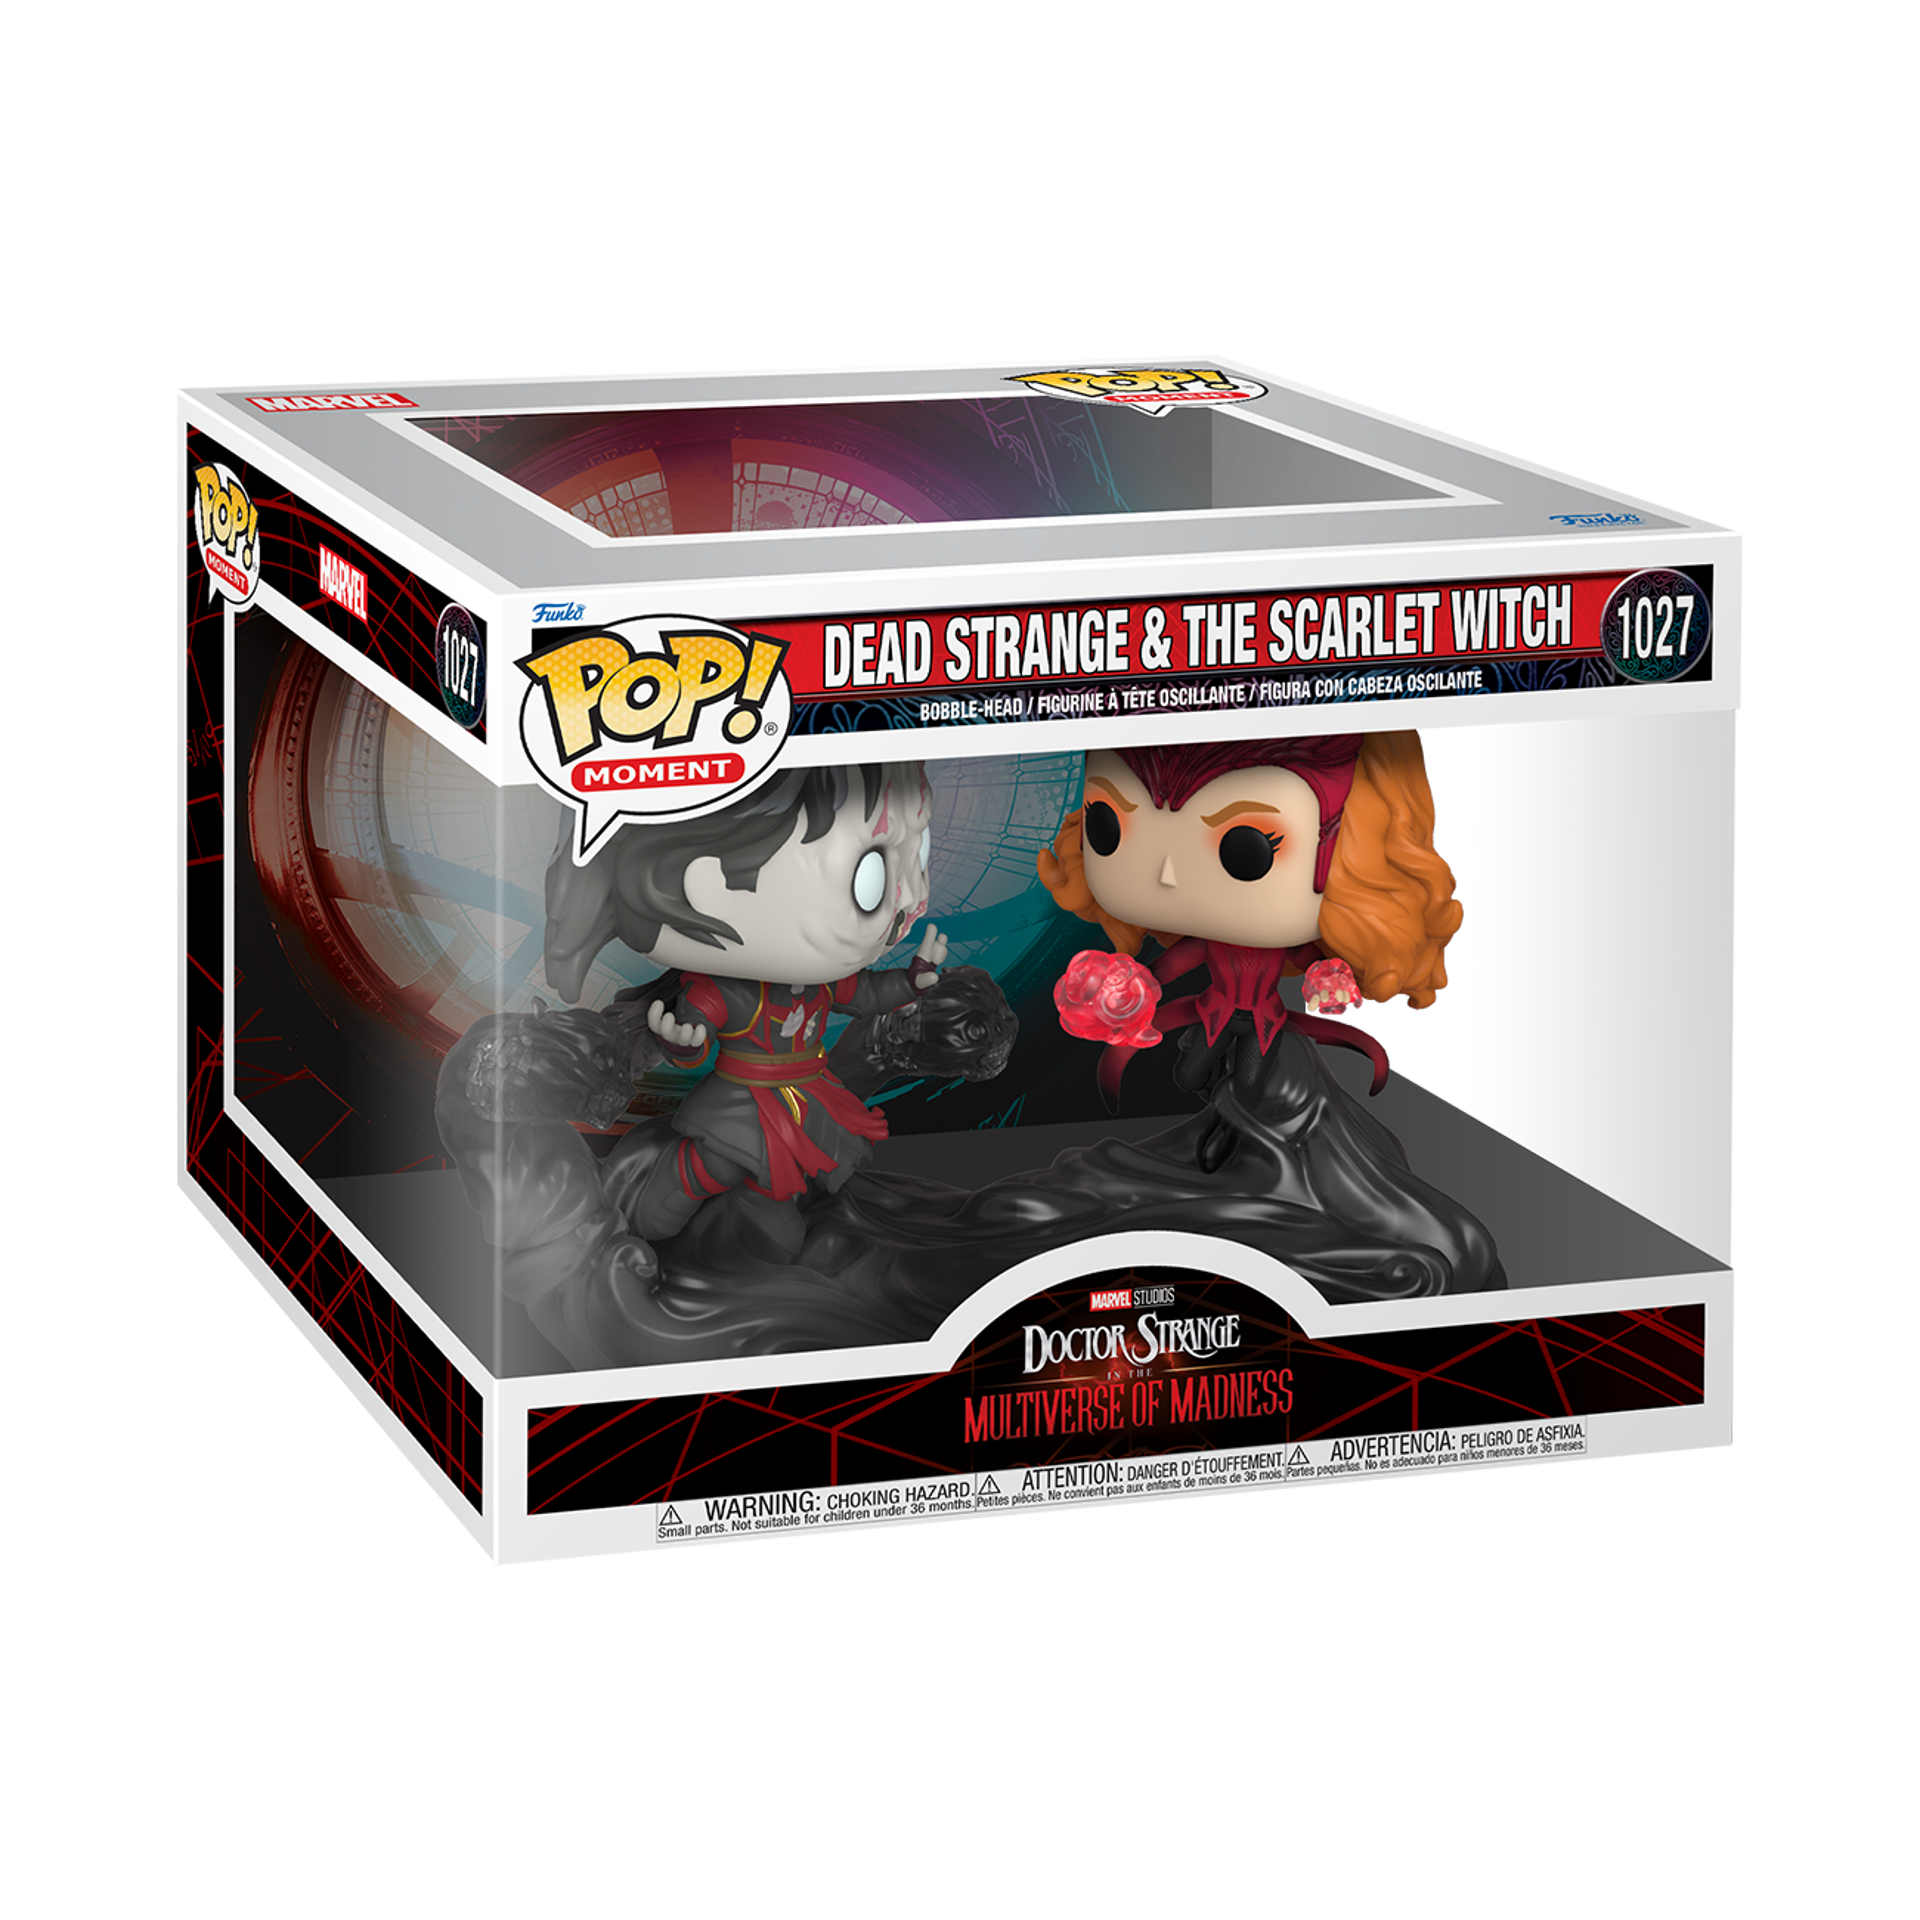 Funko Pop! Moment: Doctor Strange in the Multiverse of Madness - Dead Strange & The Scarlet Witch